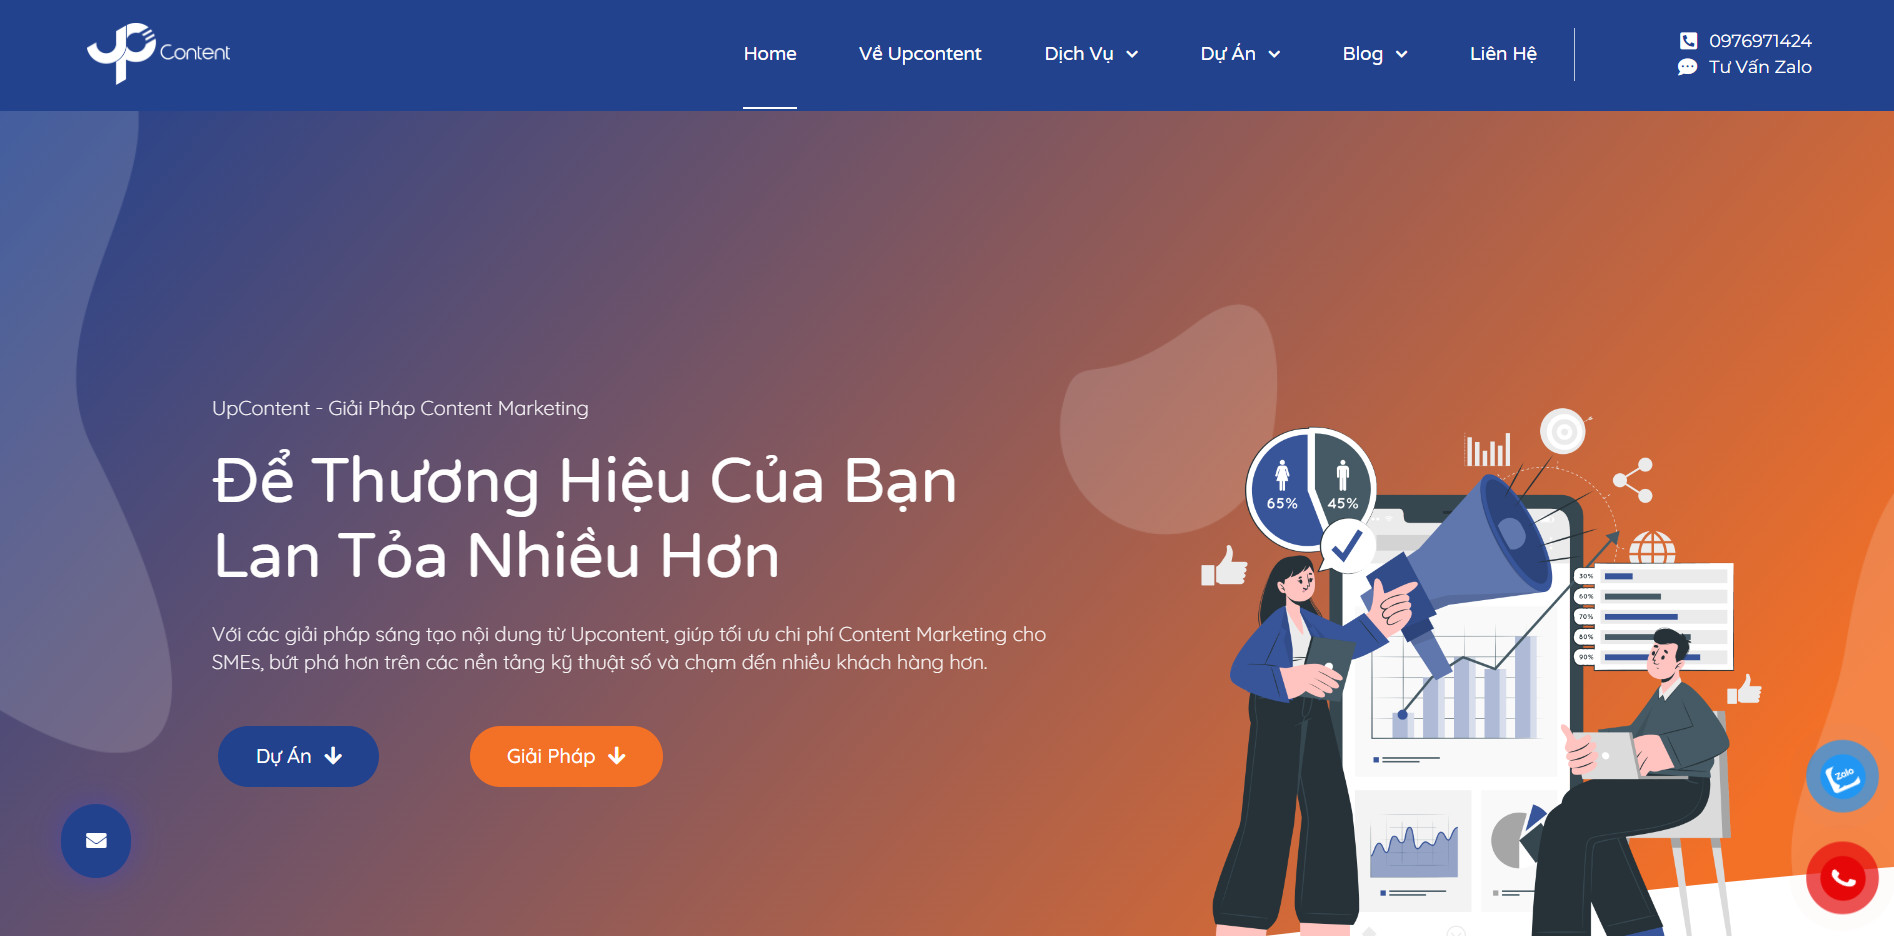 Upcontent: Dịch Vụ Content Marketing Cho Doanh Nghiệp